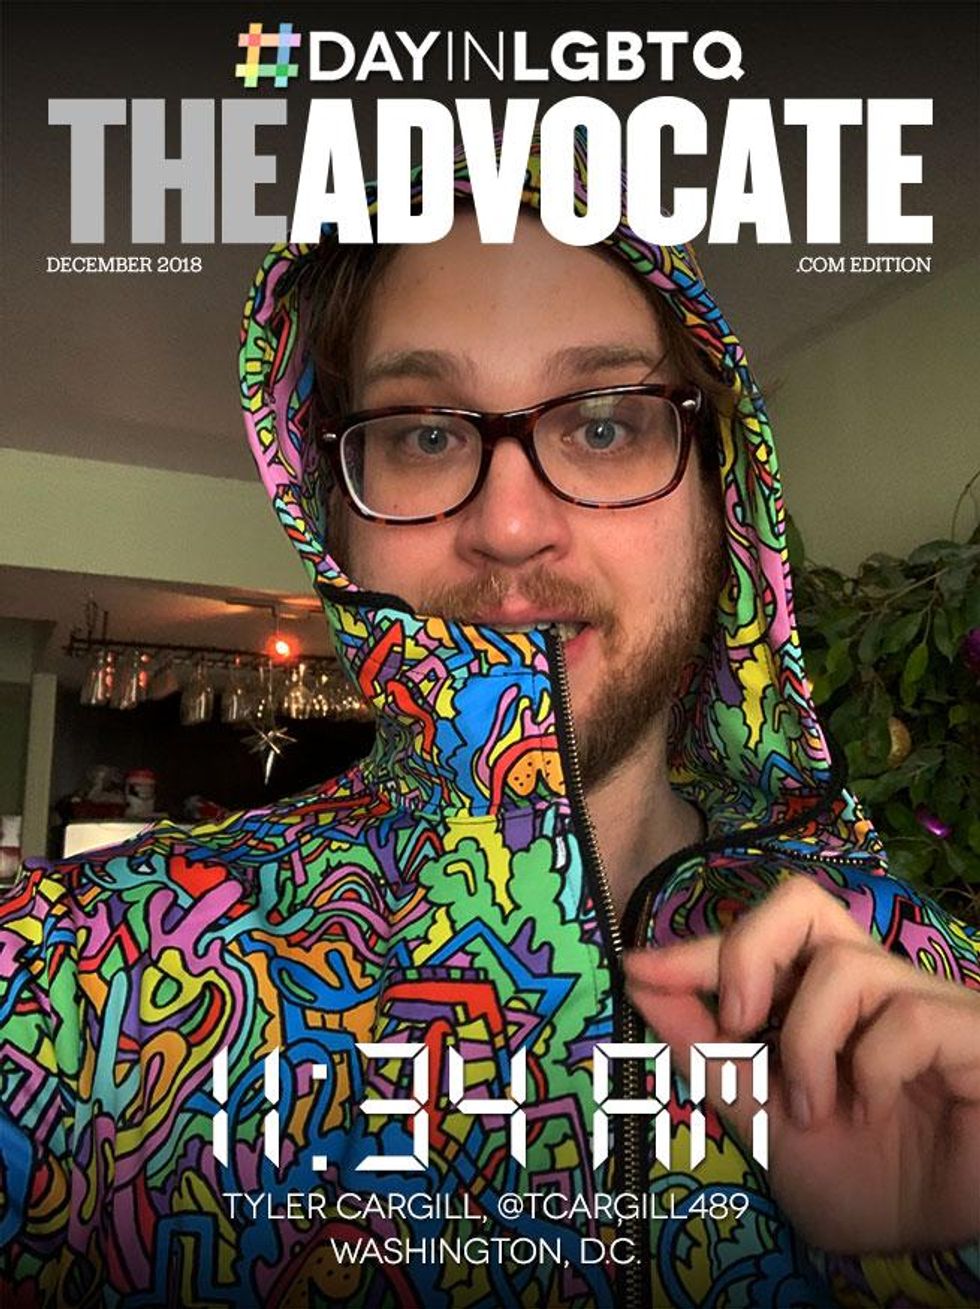 11-34-cargill-theadvocate-2018-dayinlgbt-cover-template-655